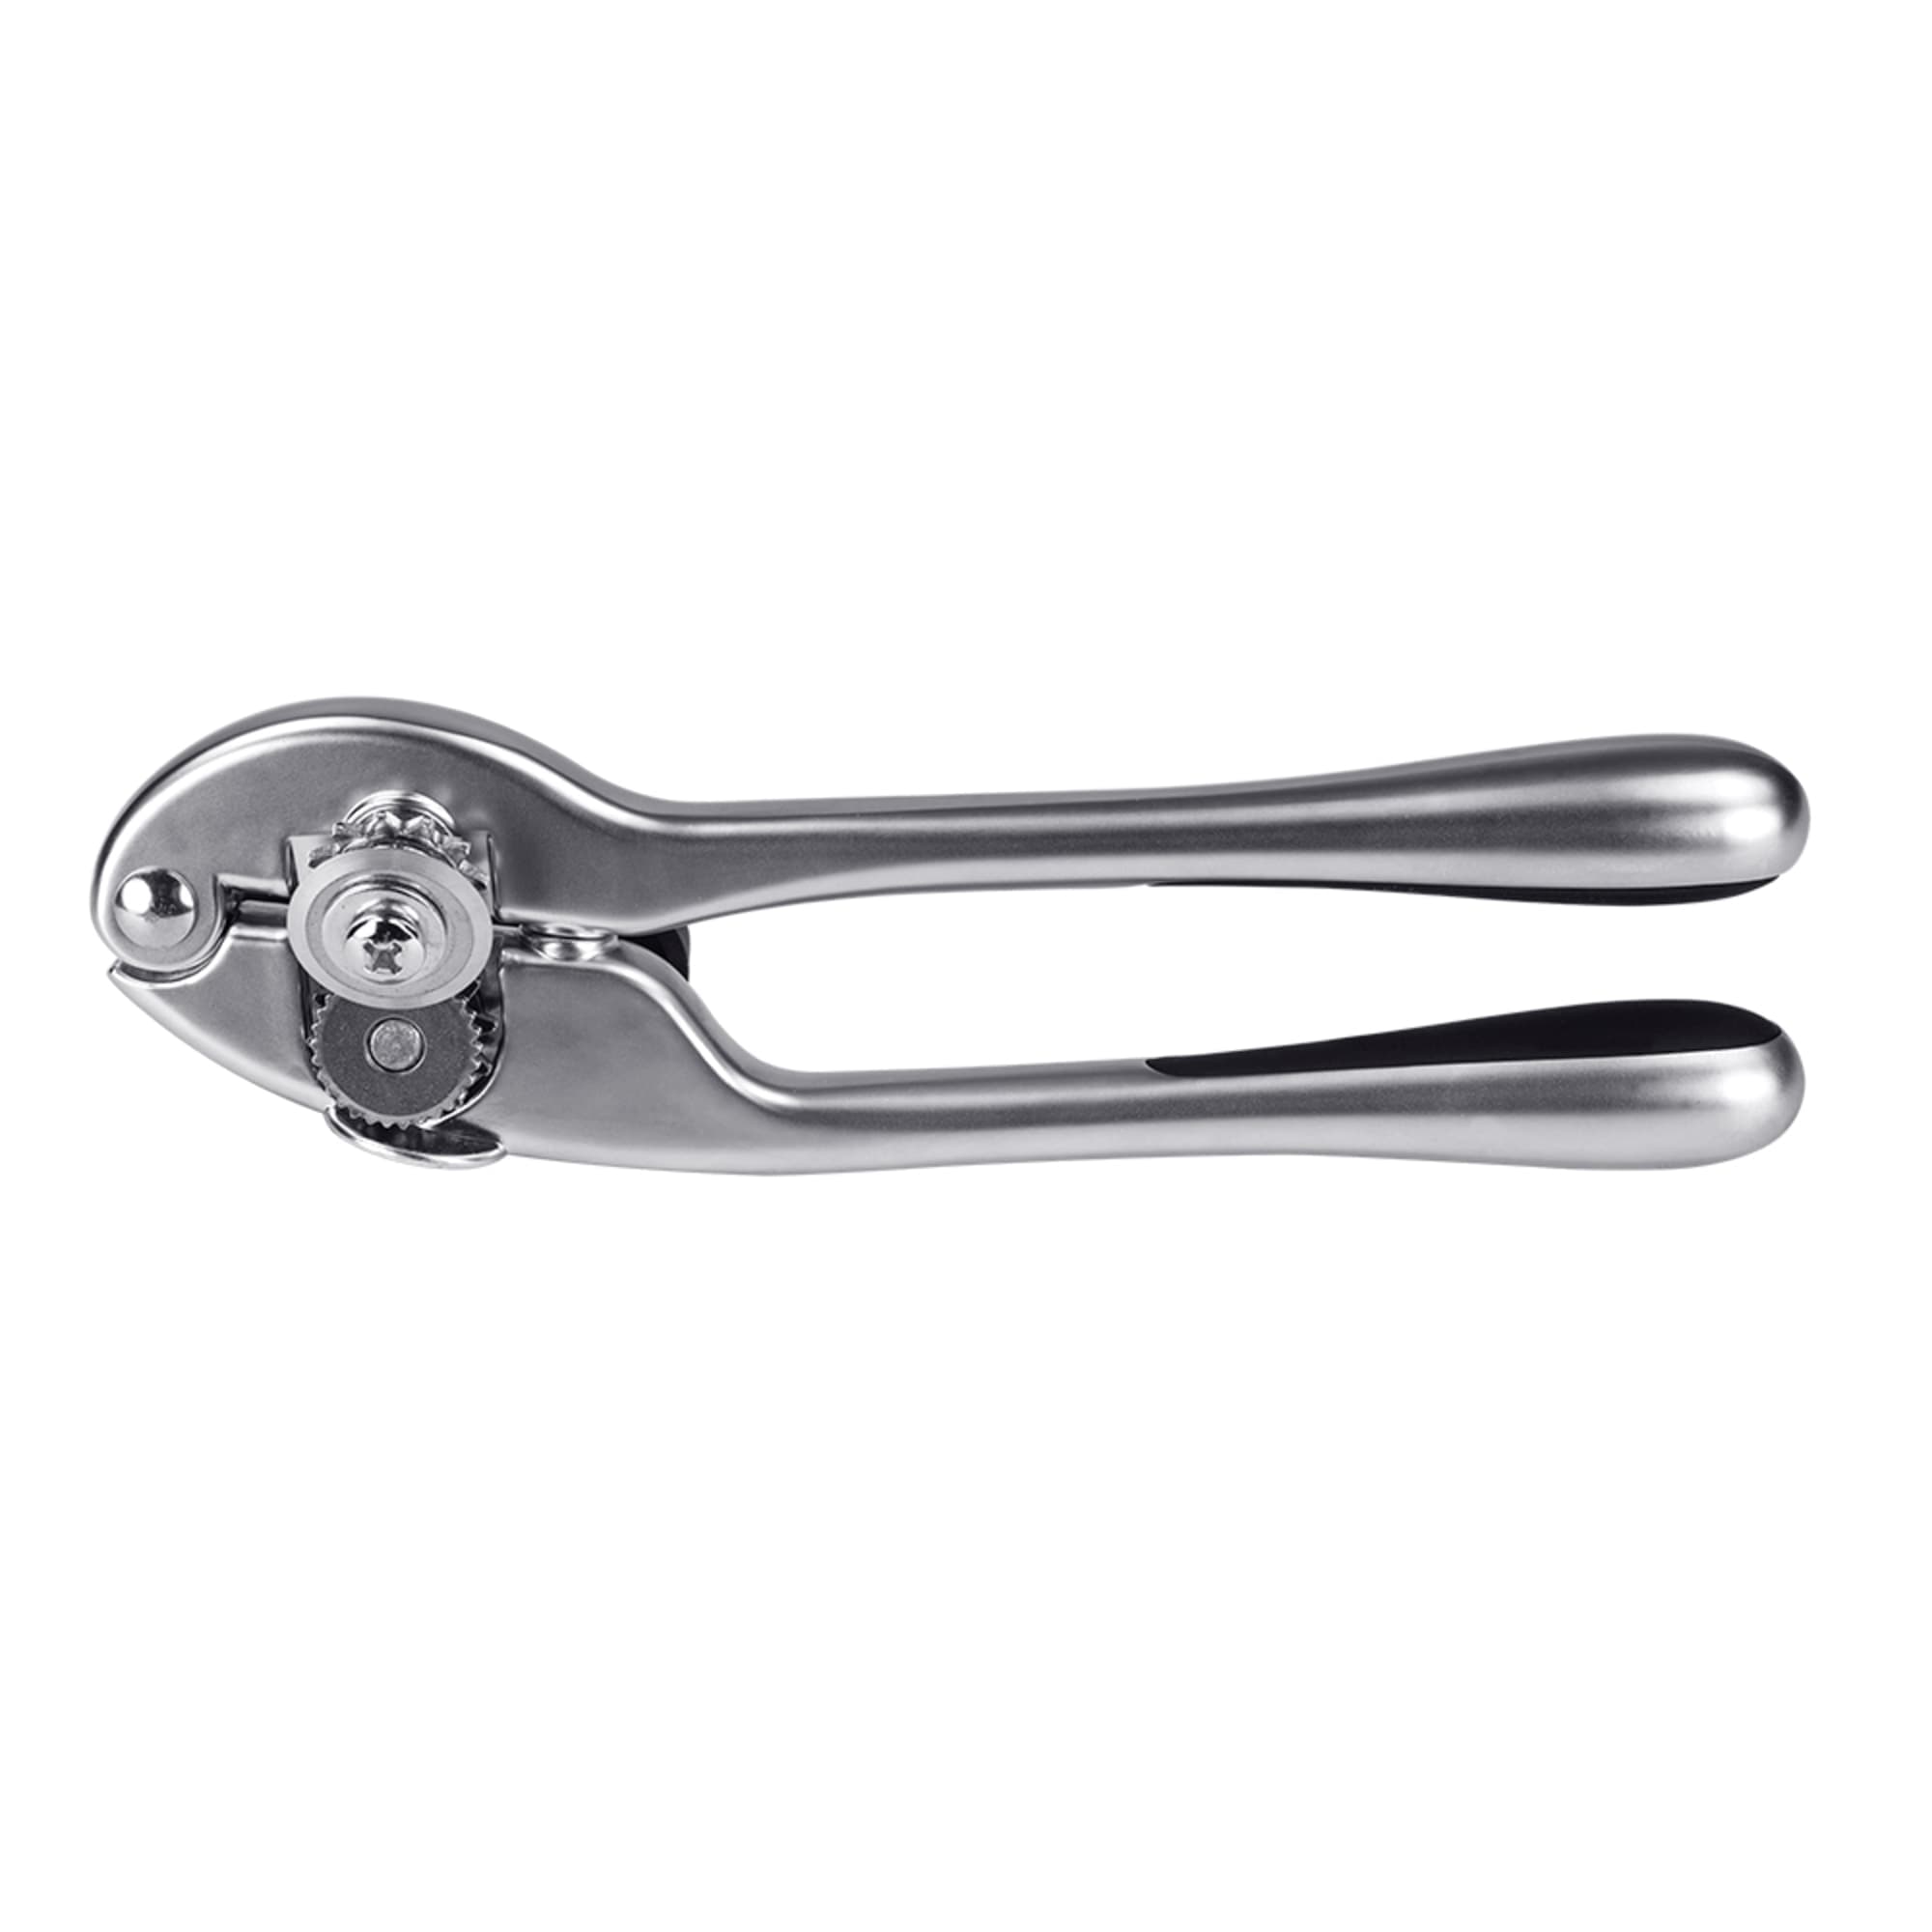 Home Basics Stainless Steel 3-in-1 Manual Can Opener, Silver, FOOD PREP